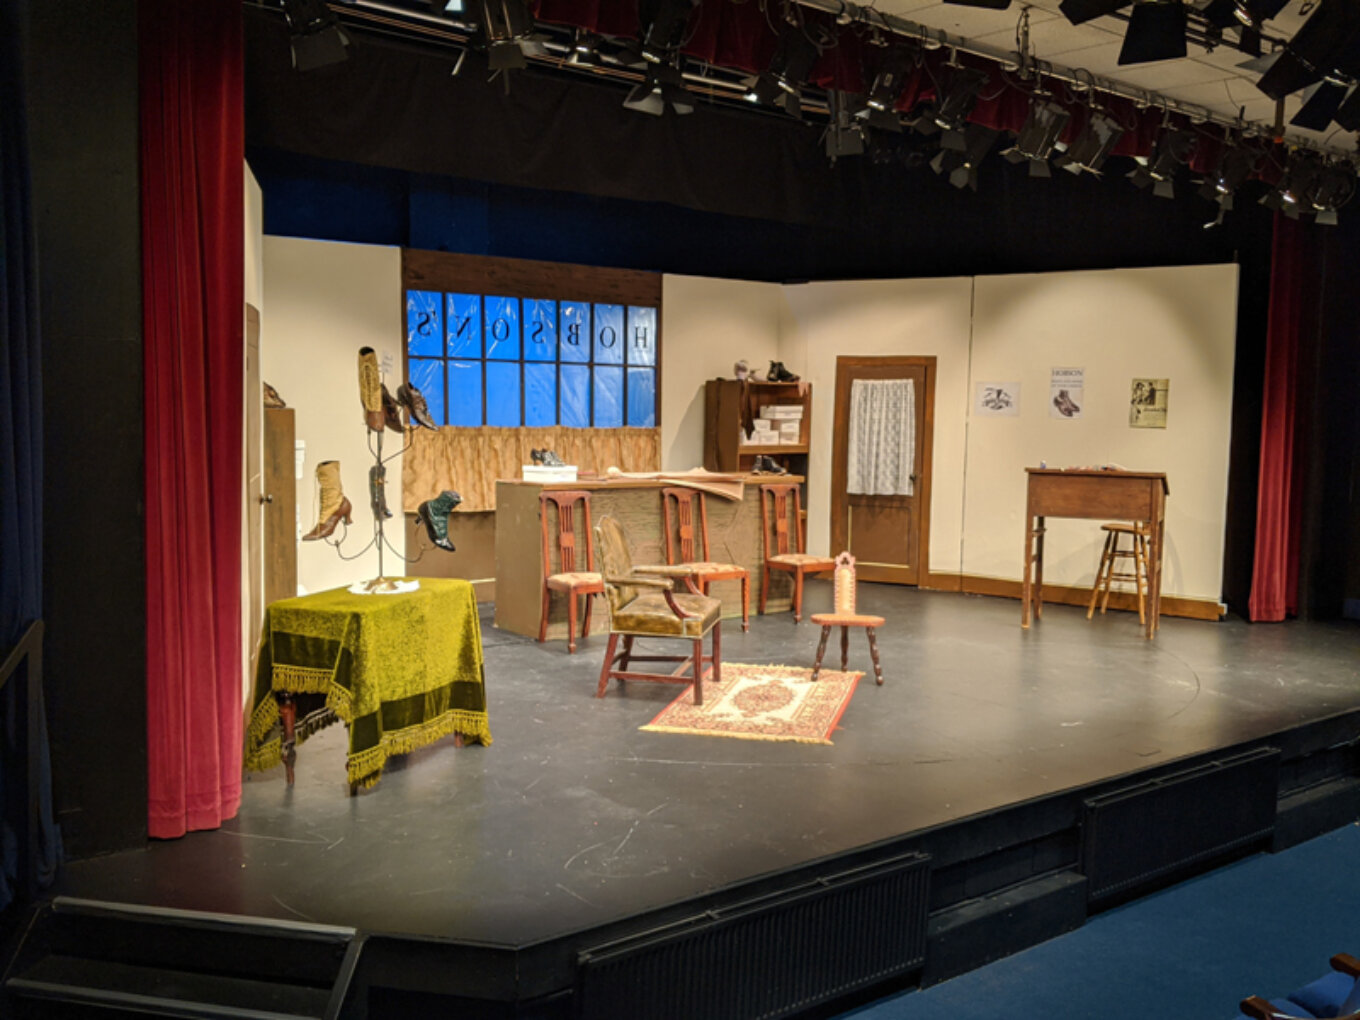 Hobsons Choice at Ramsbottom Theatre